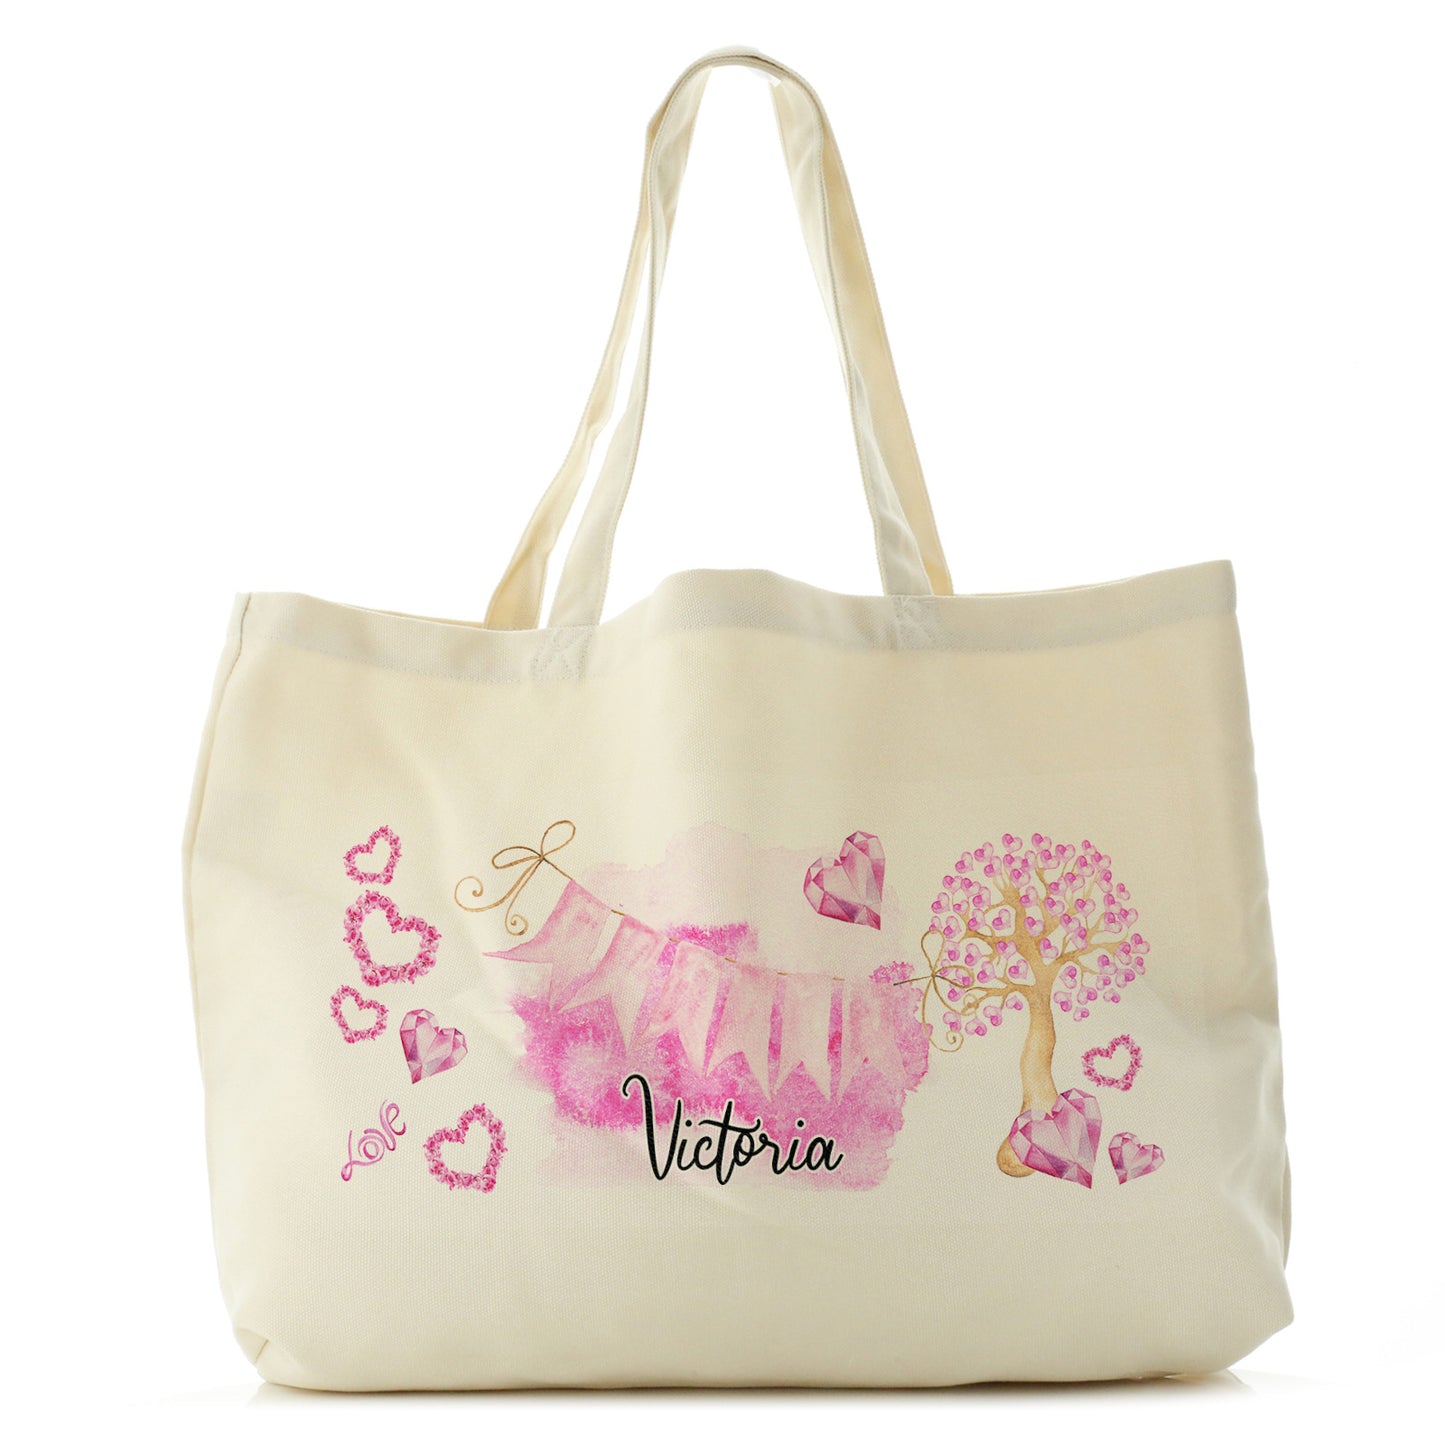 Personalised Canvas Tote Bag with Stylish Text and Pink Love Landscape Print